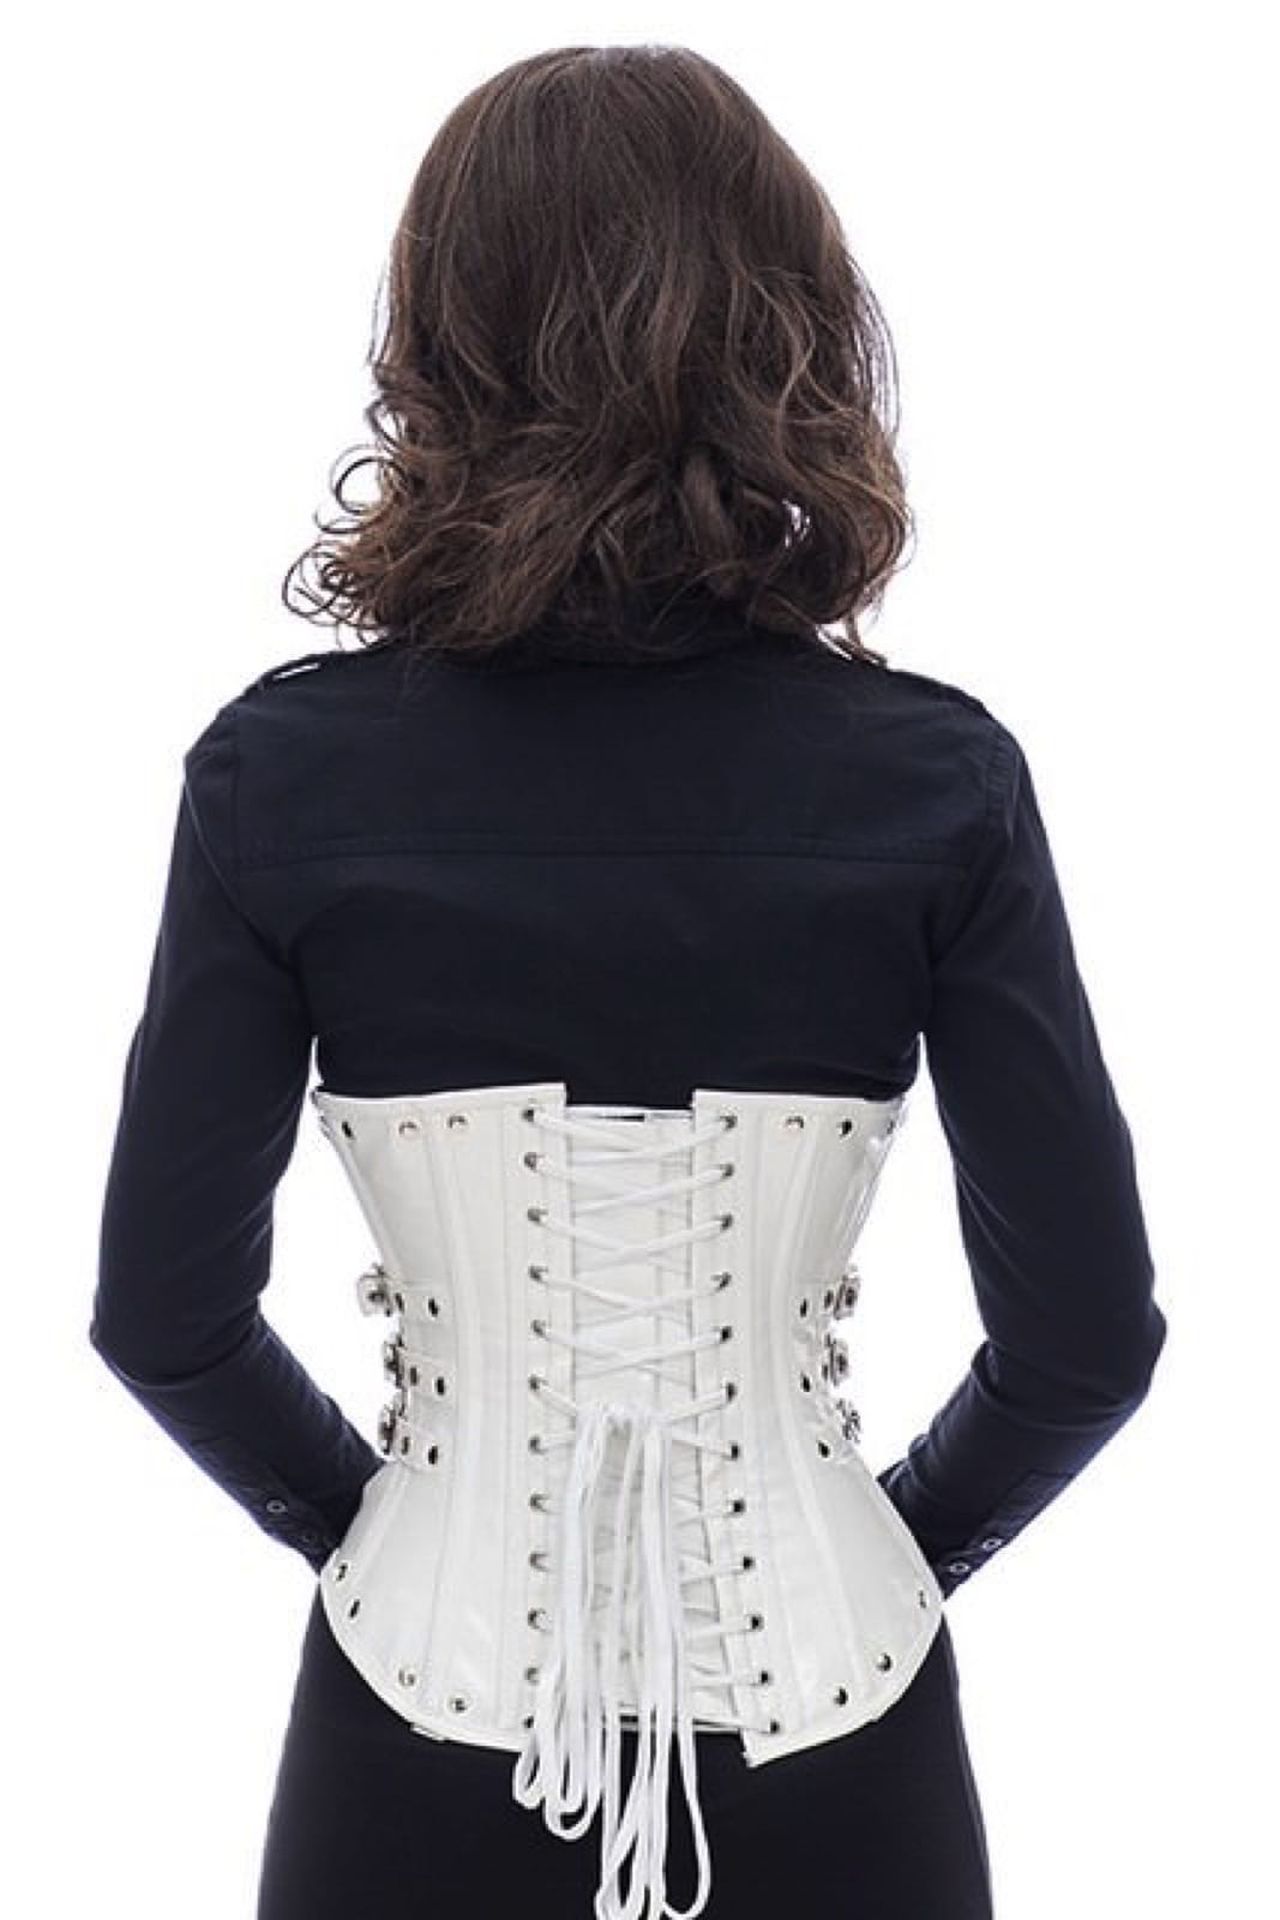 Corset white vinyl underbust with rivets and side buckles pg76